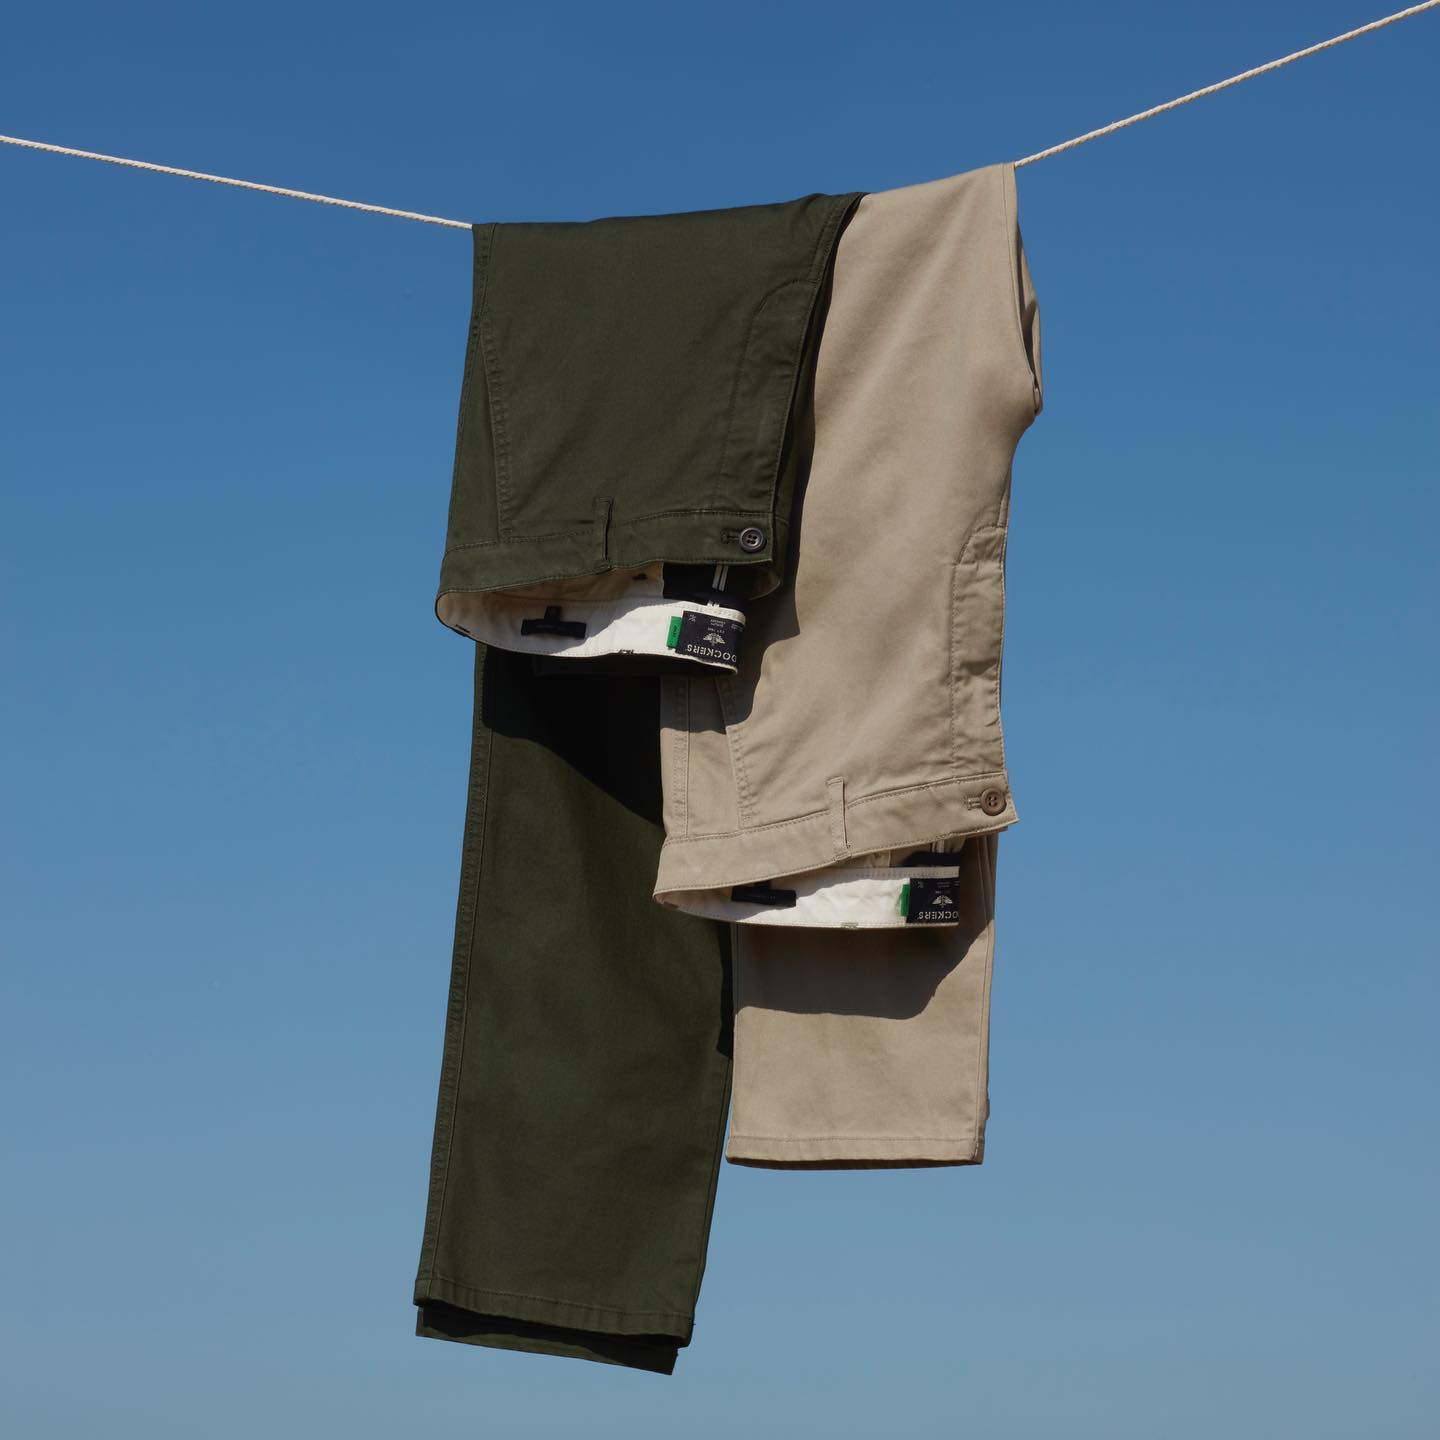 drying pants under the sun